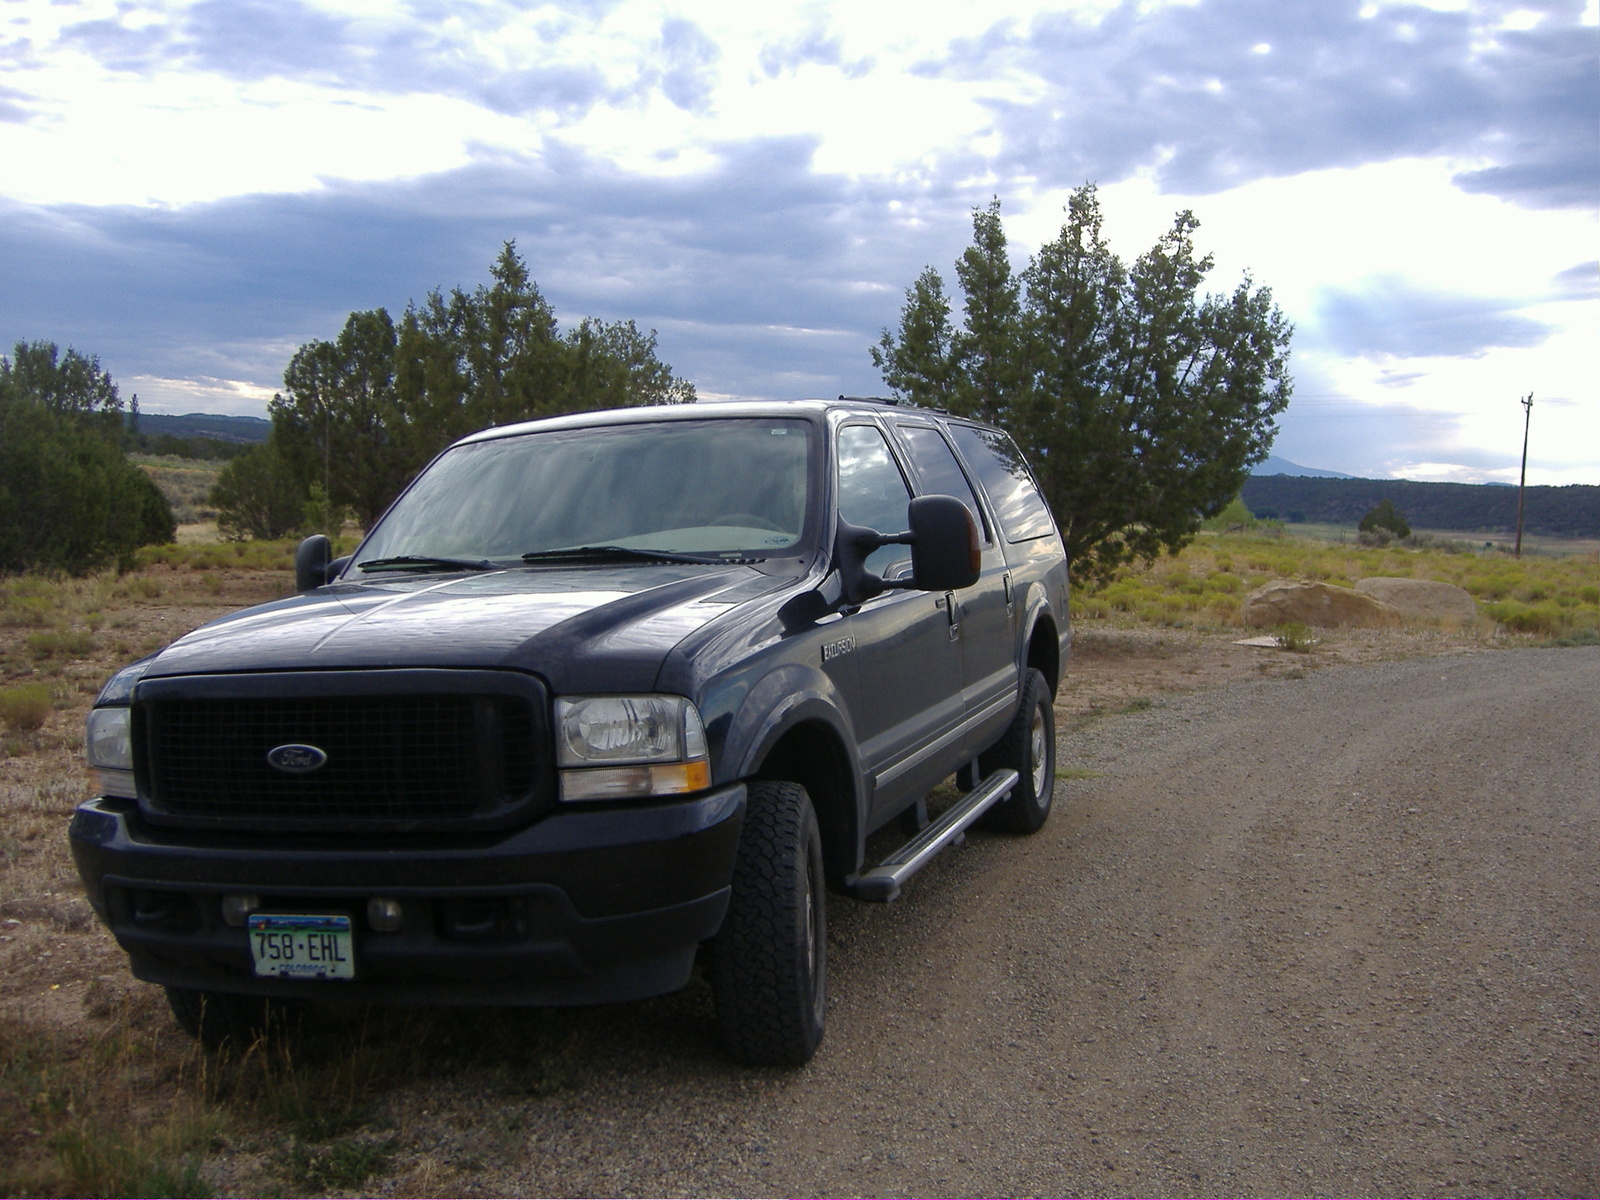 2004 Ford excursion limited reviews #7